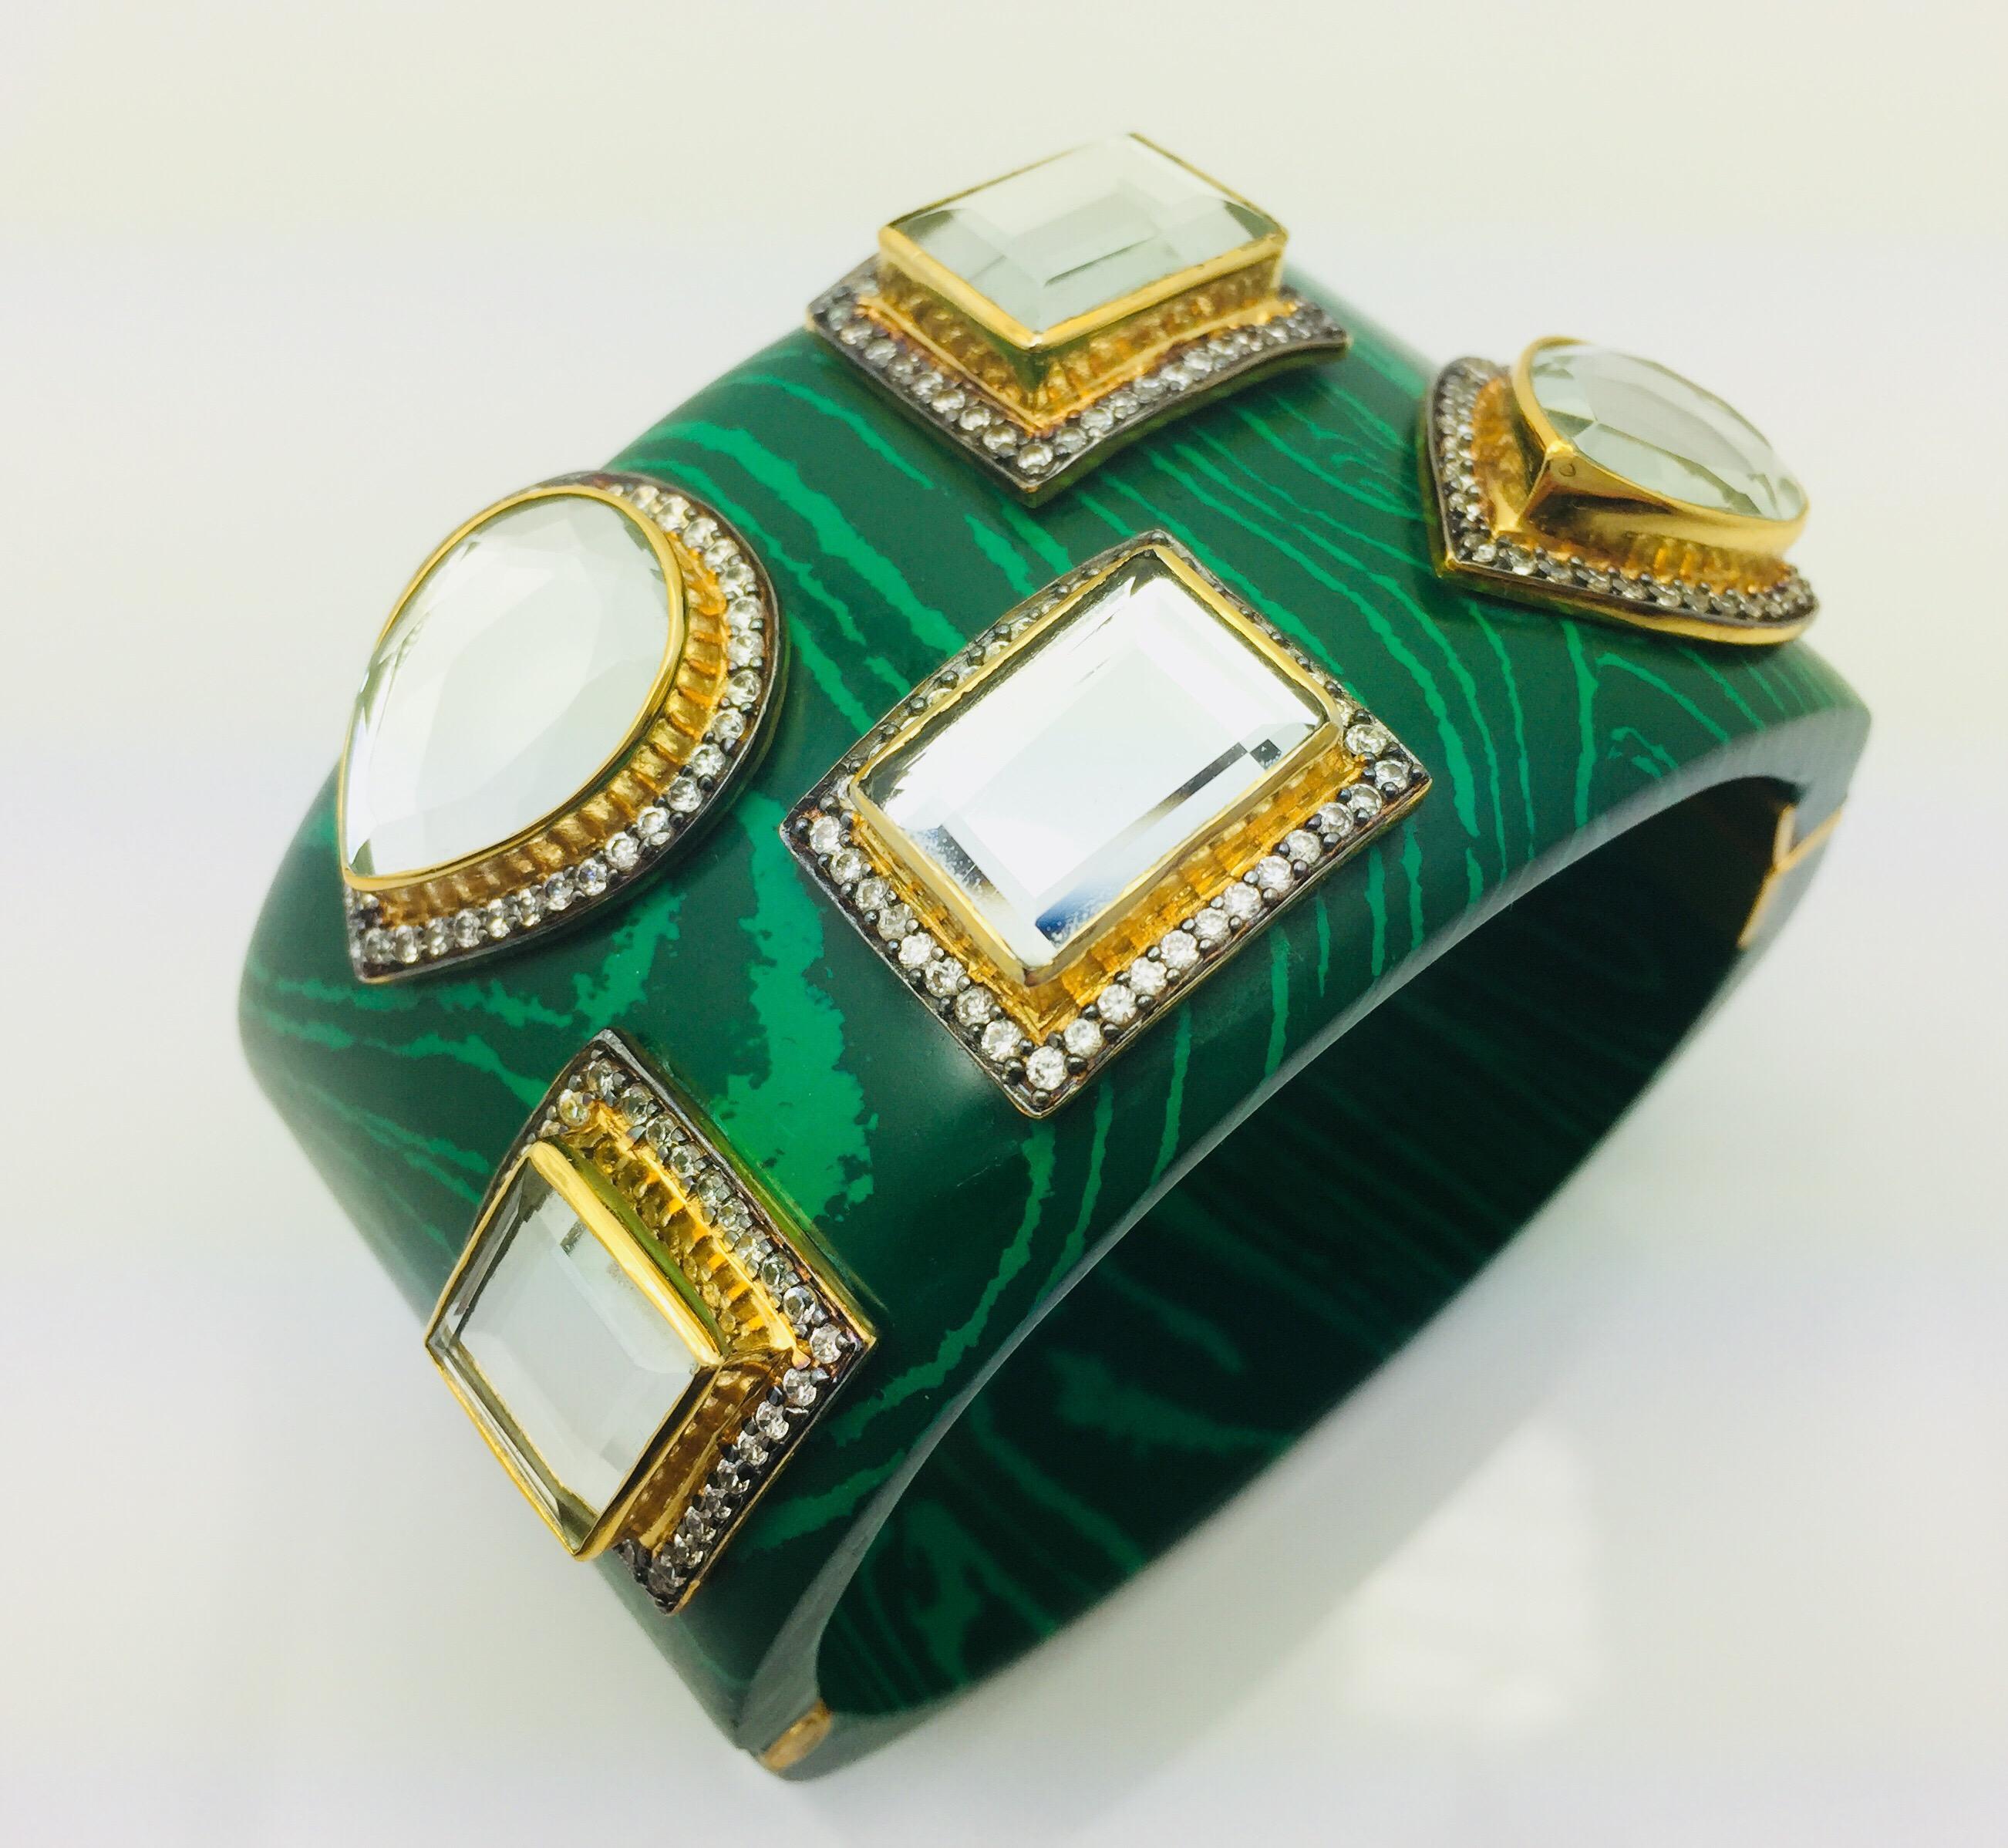 The smooth malachite resin bracelet provides a stunning backdrop for the various shapes of reflective stones, each of which has its own frame of dazzling CZs. Bracelet has a hinged, box tab closure.

Available in BlackOnyx and